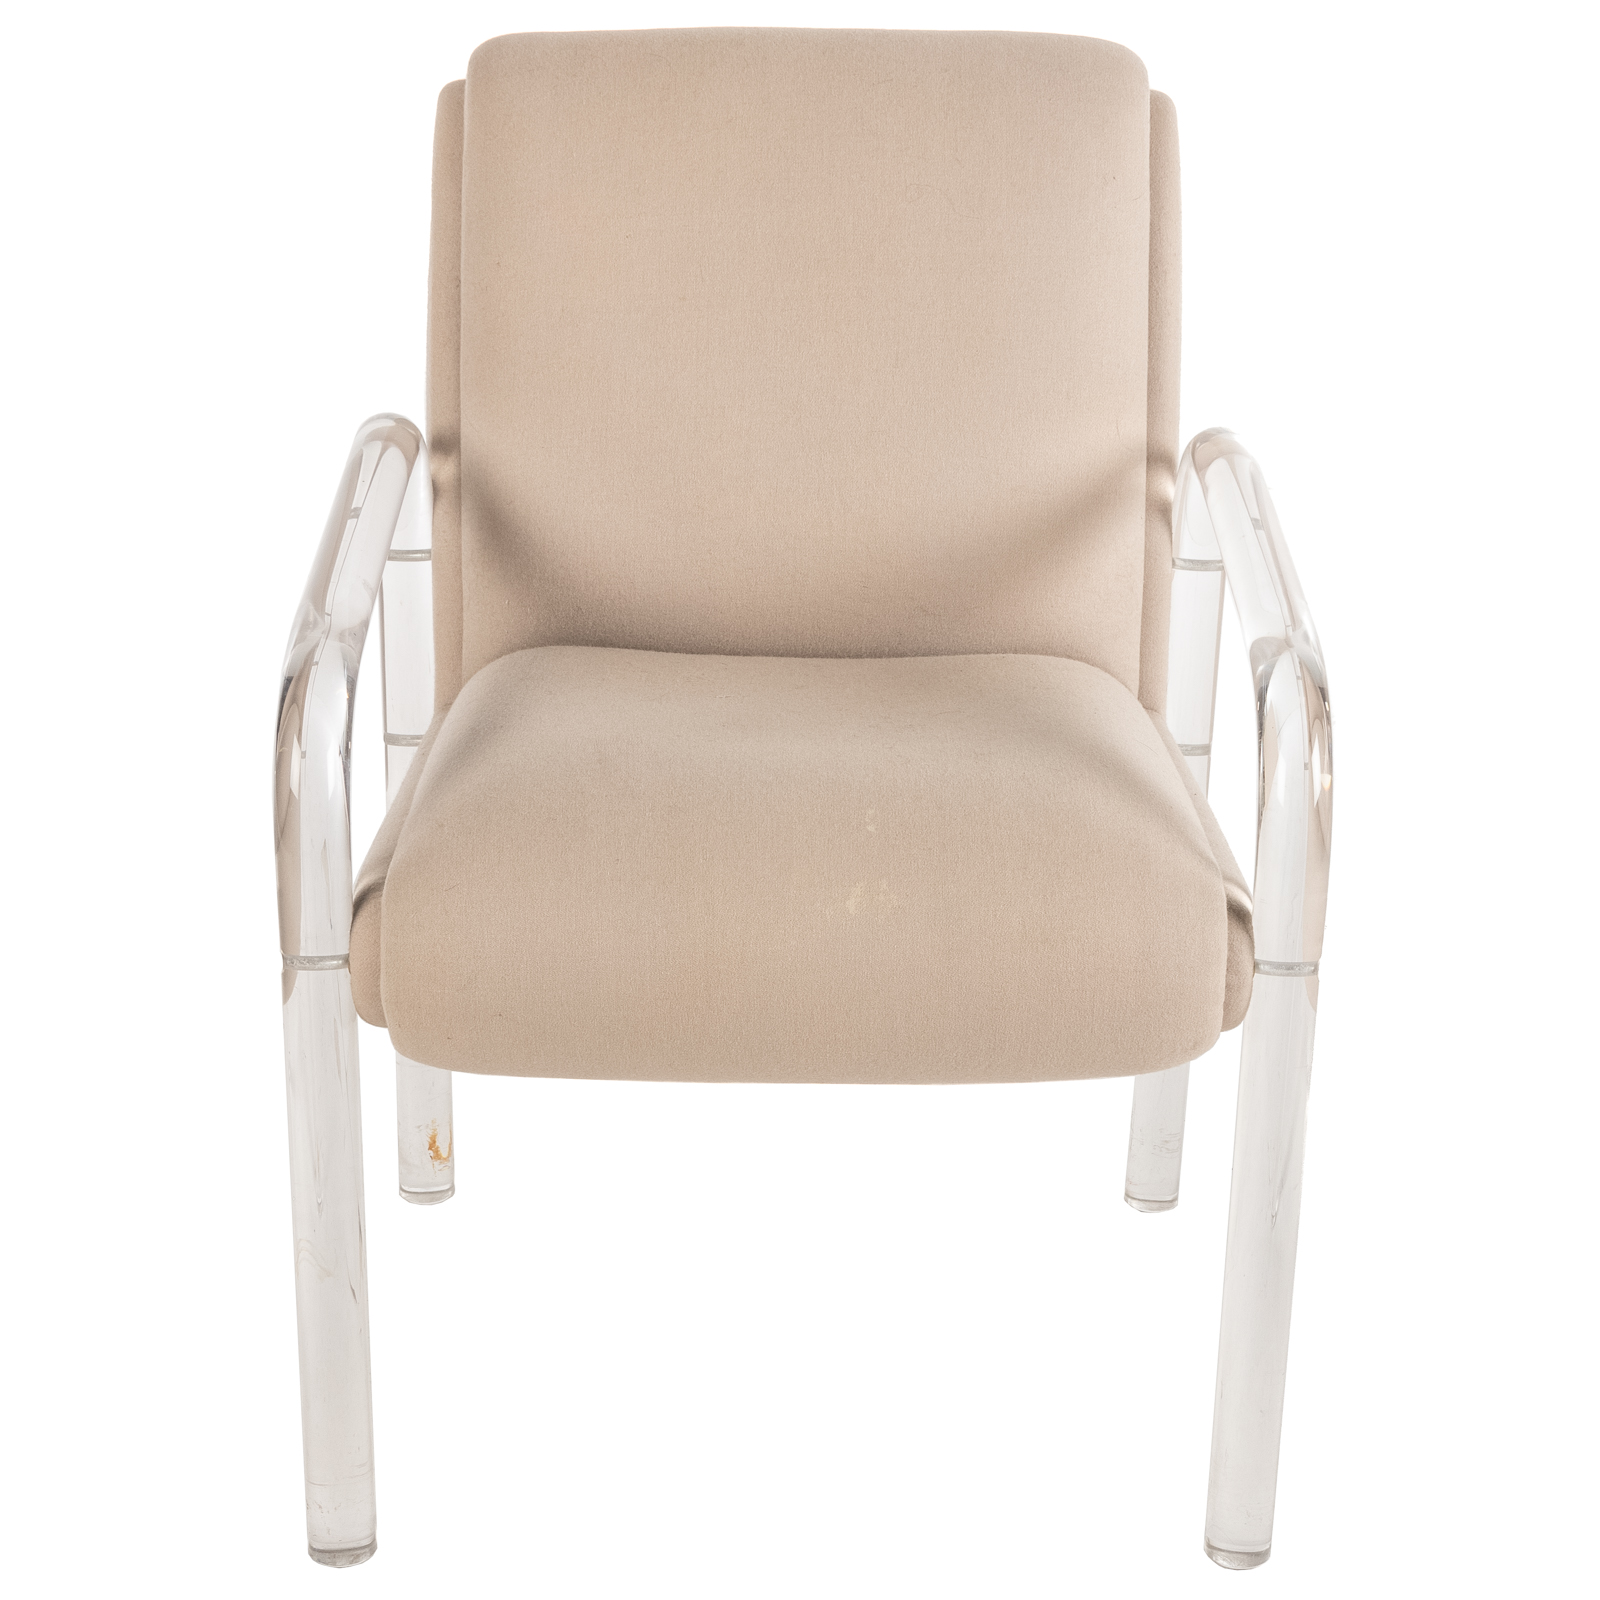 CONTEMPORARY UPHOLSTERED LUCITE 3cb77a